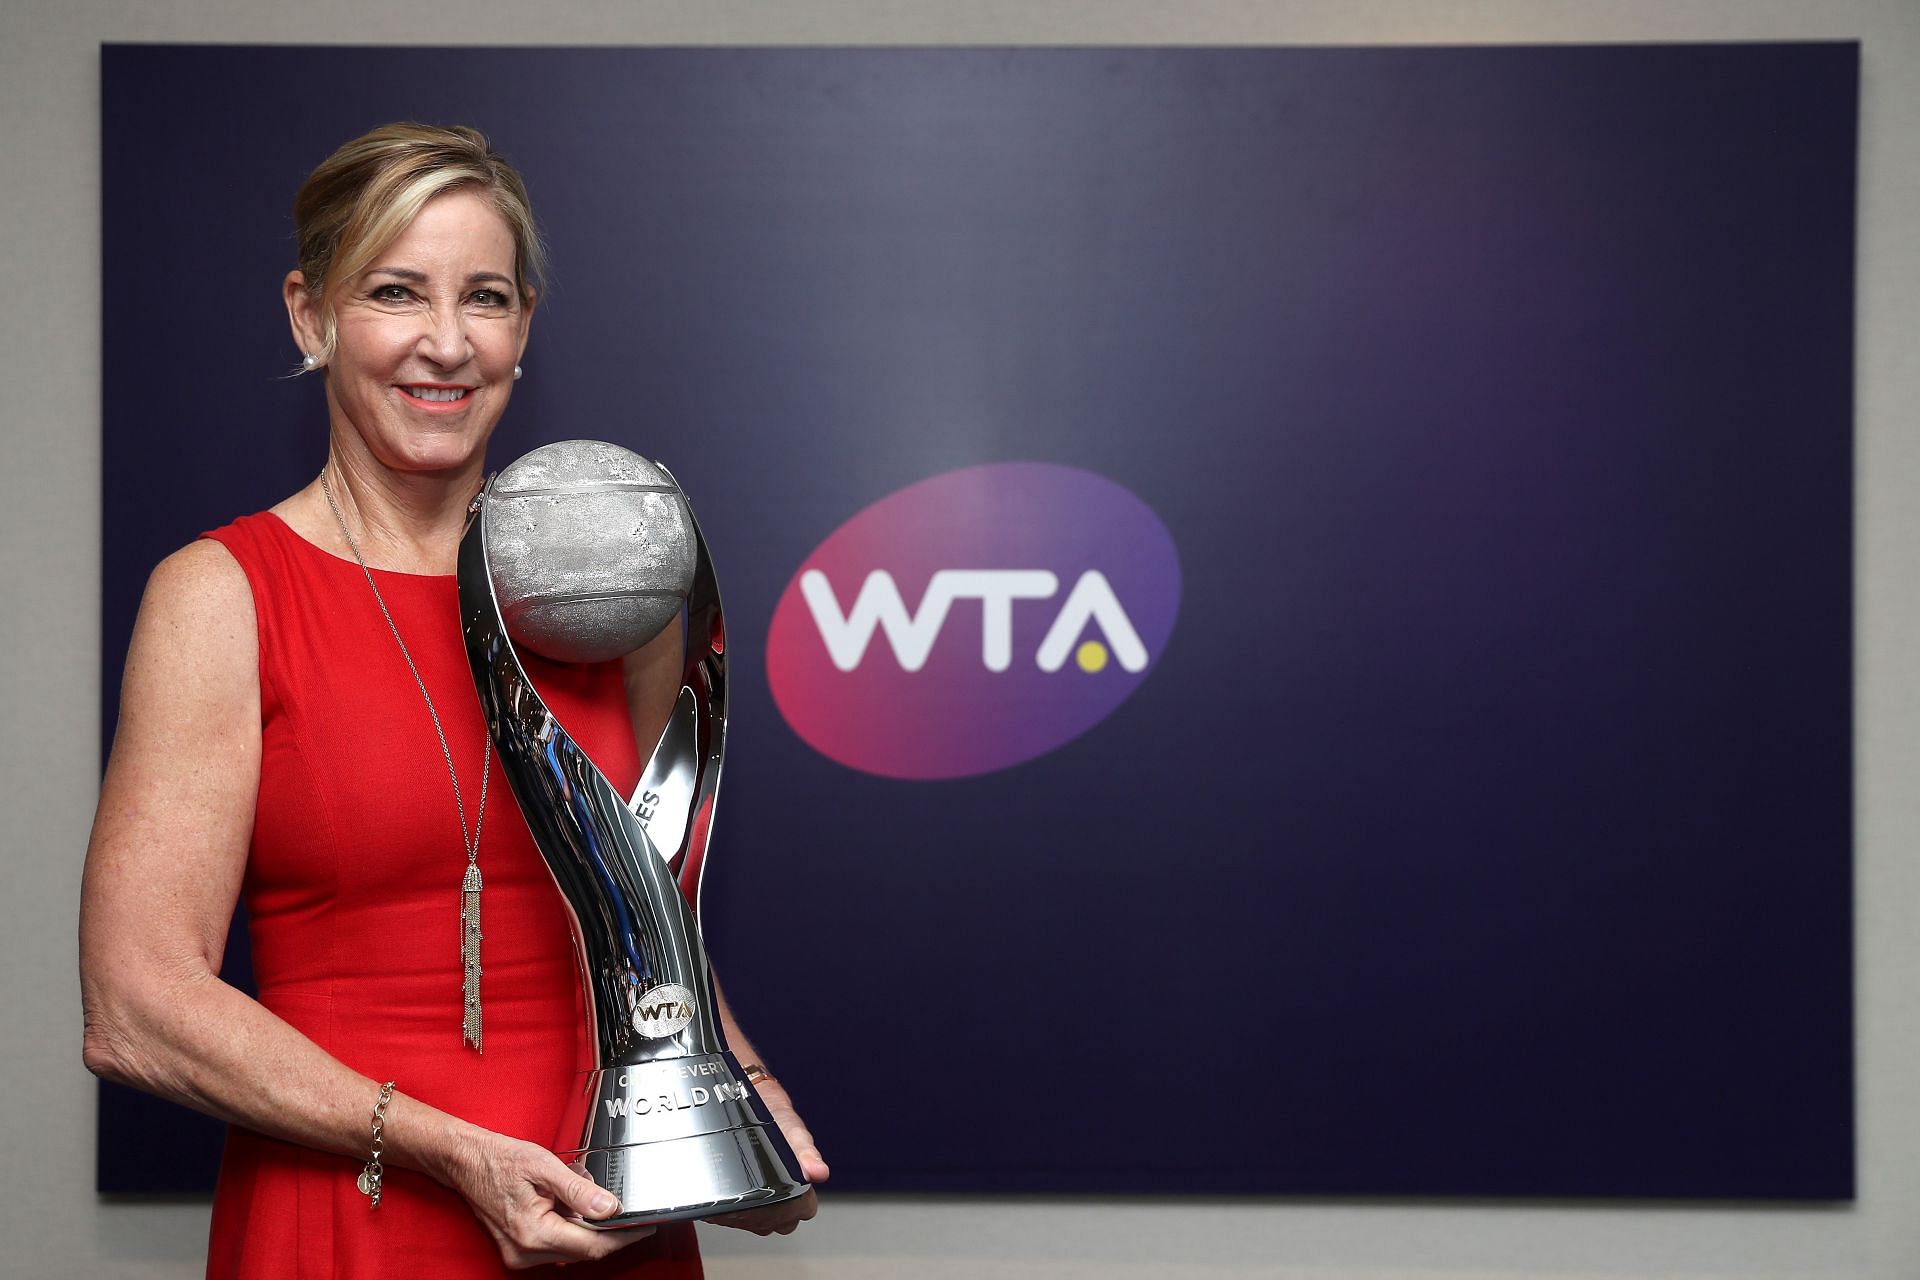 Chris Evert at the BNP Paribas WTA Finals Singapore presented by SC Global - Day 6